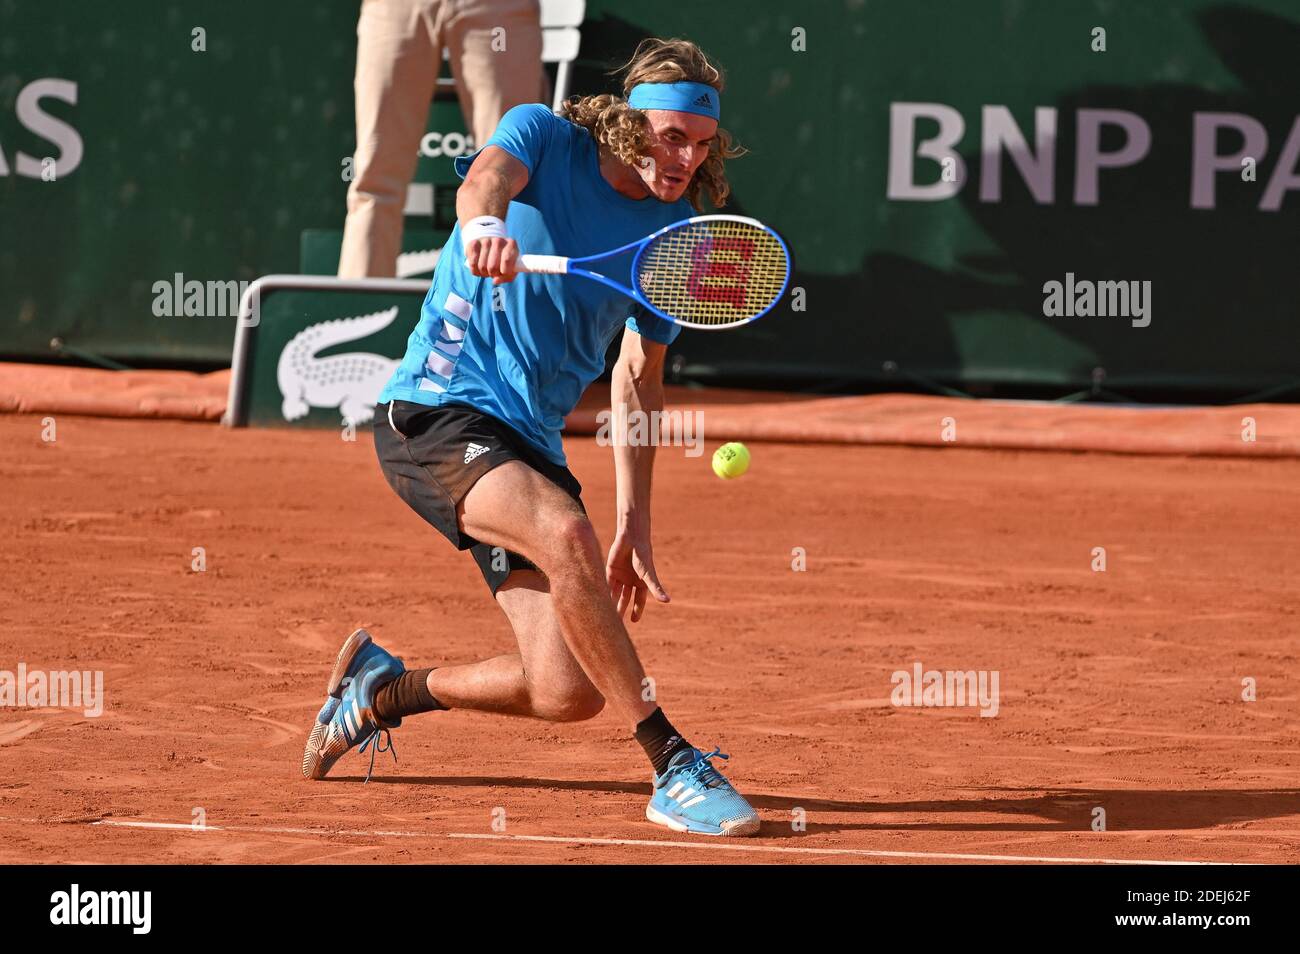 Stefanos Tsitsipas of Greece in action against Stan Wawrinka of Switzerland  during day 8 of the 2019 French Open at Roland Garros stadium on June 2,  2019 in Paris, France. Photo by